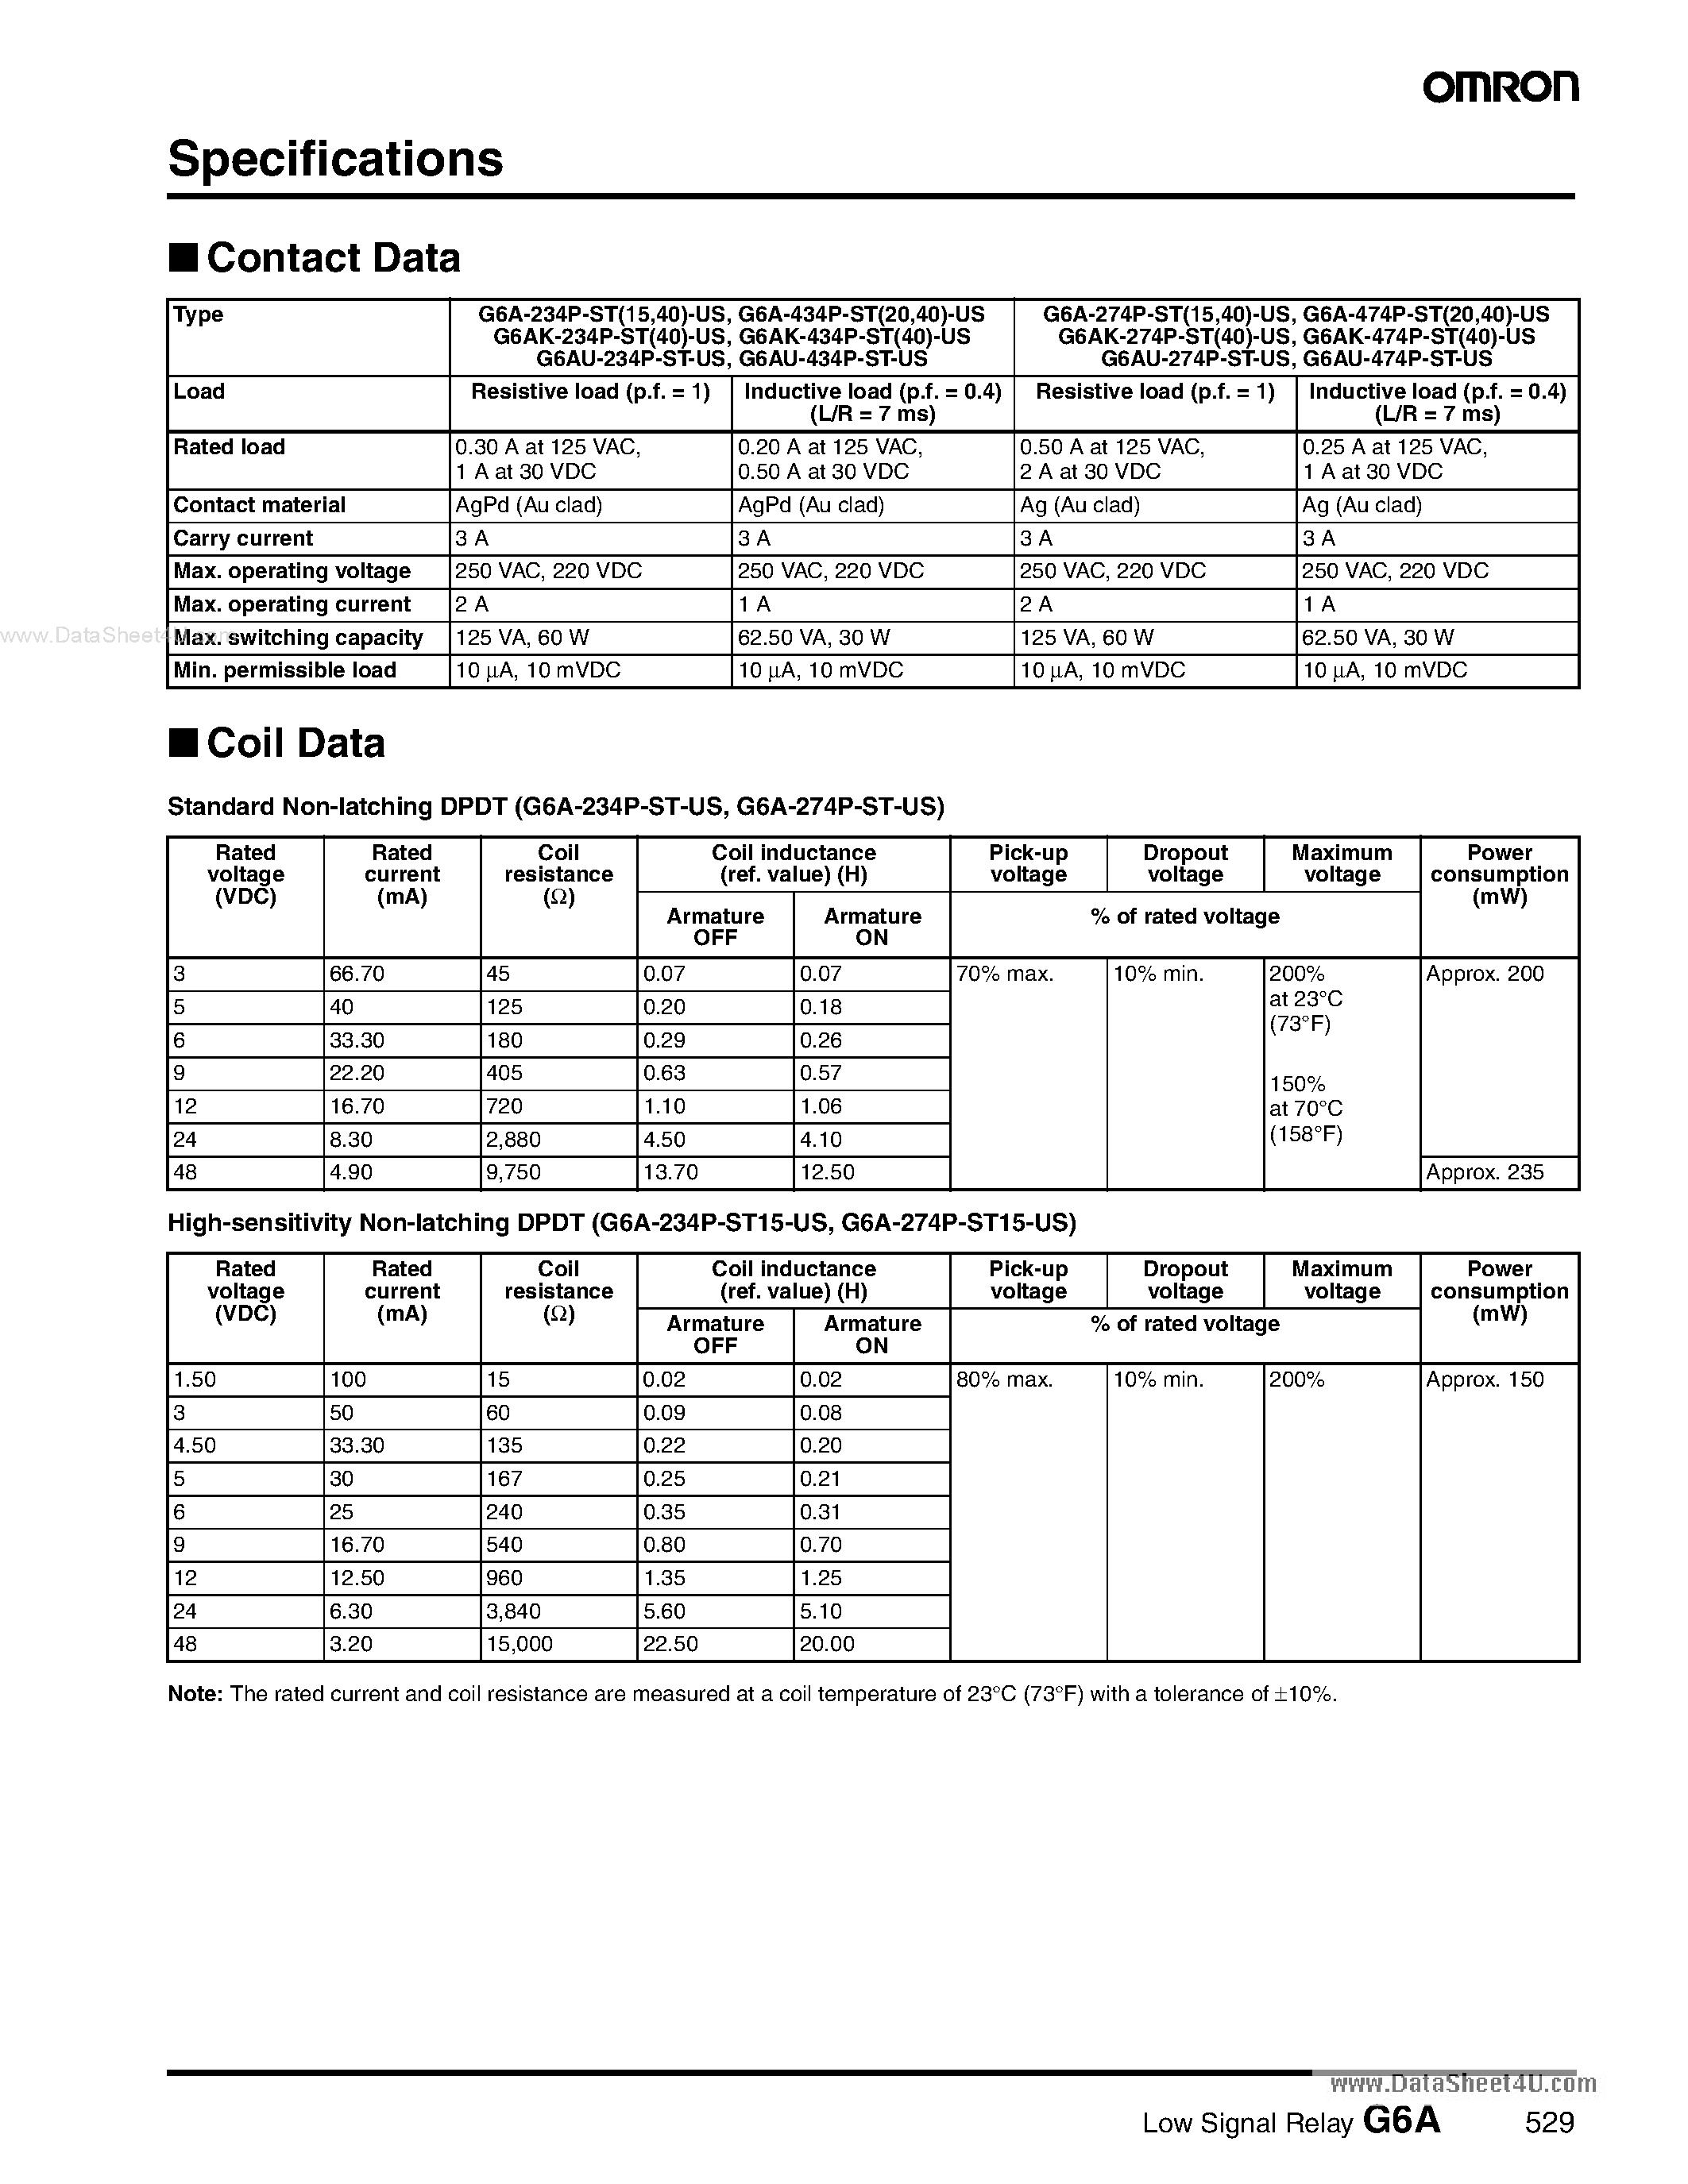 Datasheet G6A - Low Signal Relay page 2